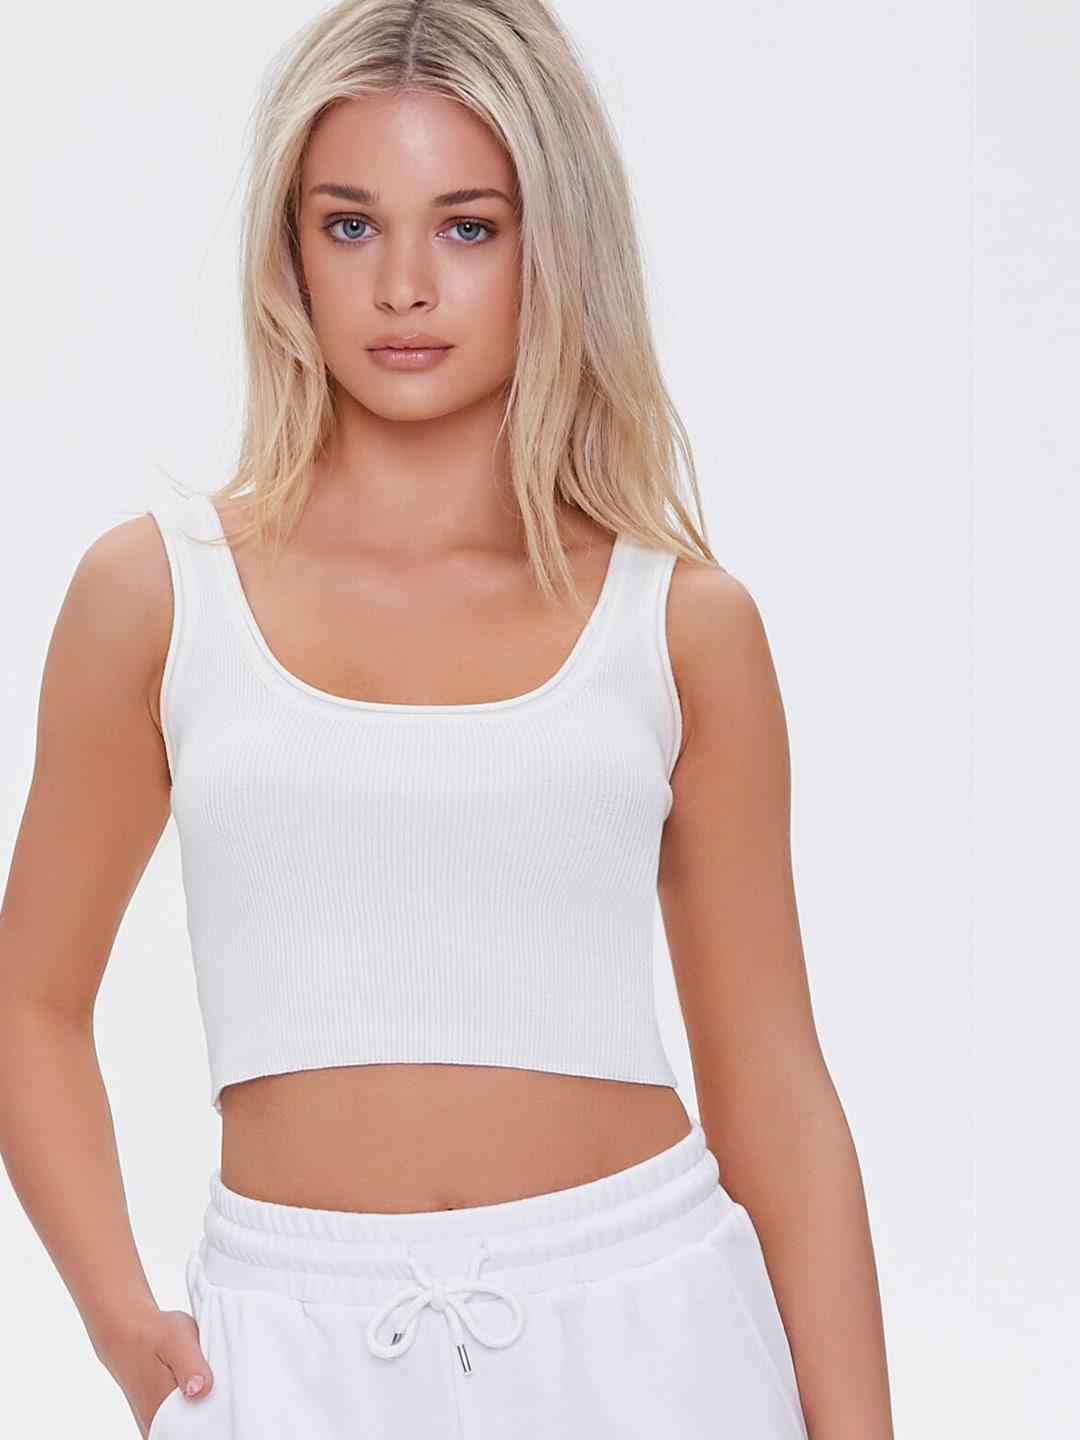 forever-21-women-off-white-tank-crop-top